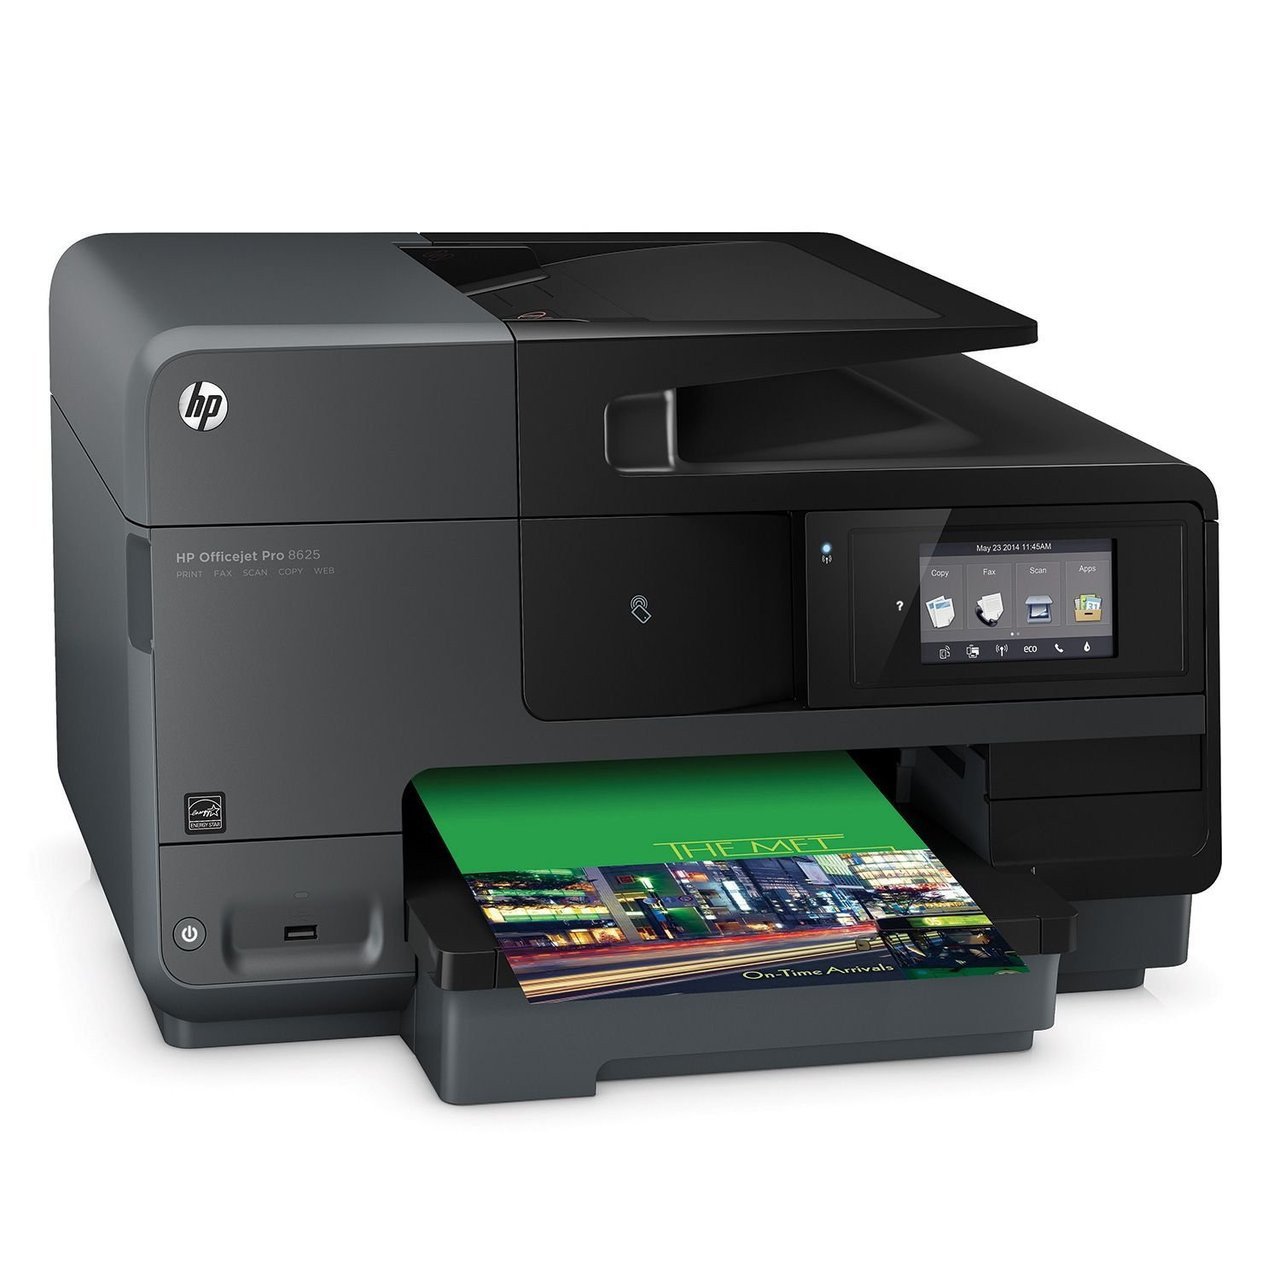 HP OfficeJet Pro 8625 e-All-in-One For